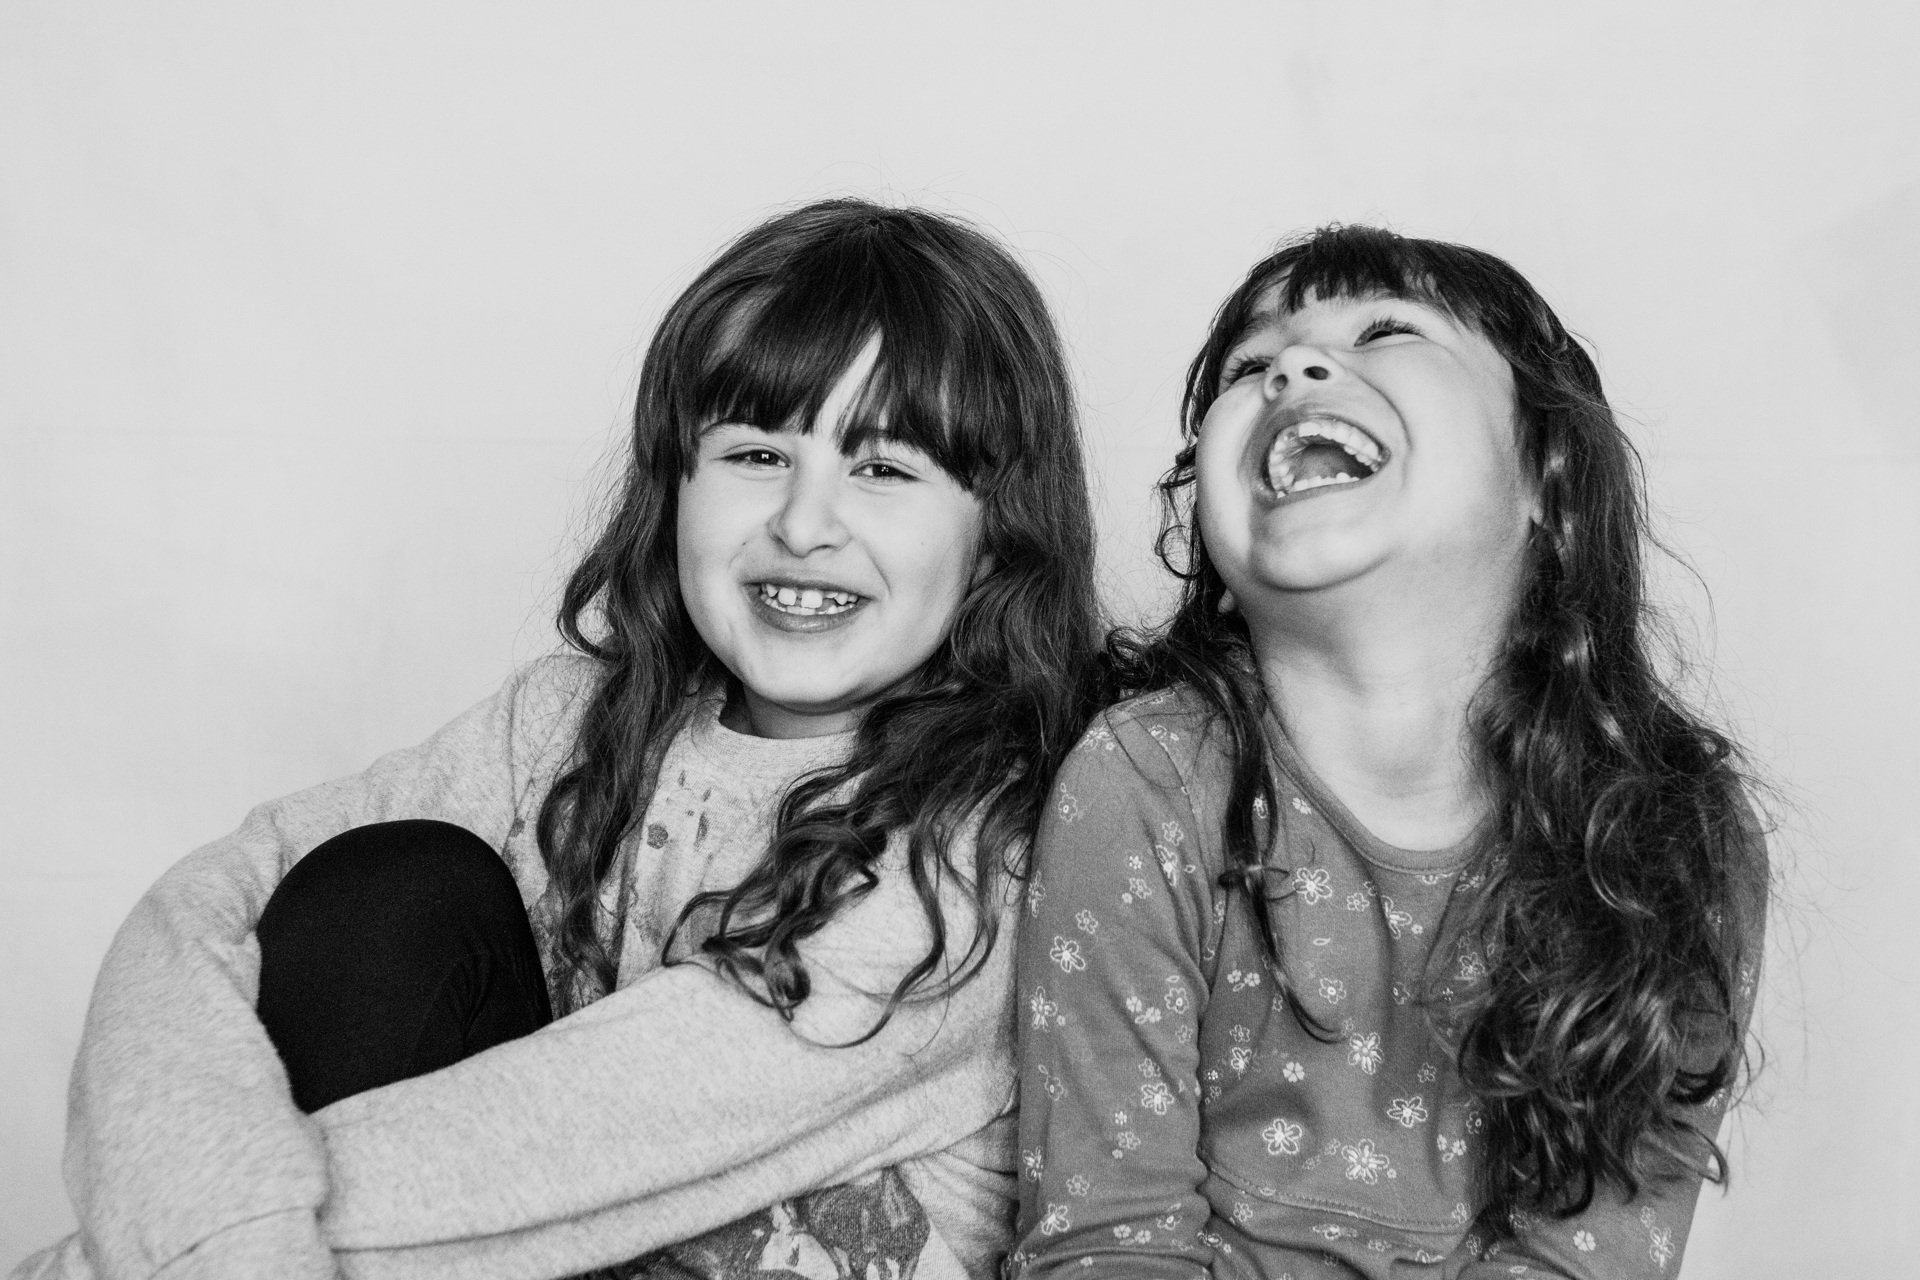 Portrait of two girls, best friends laughing